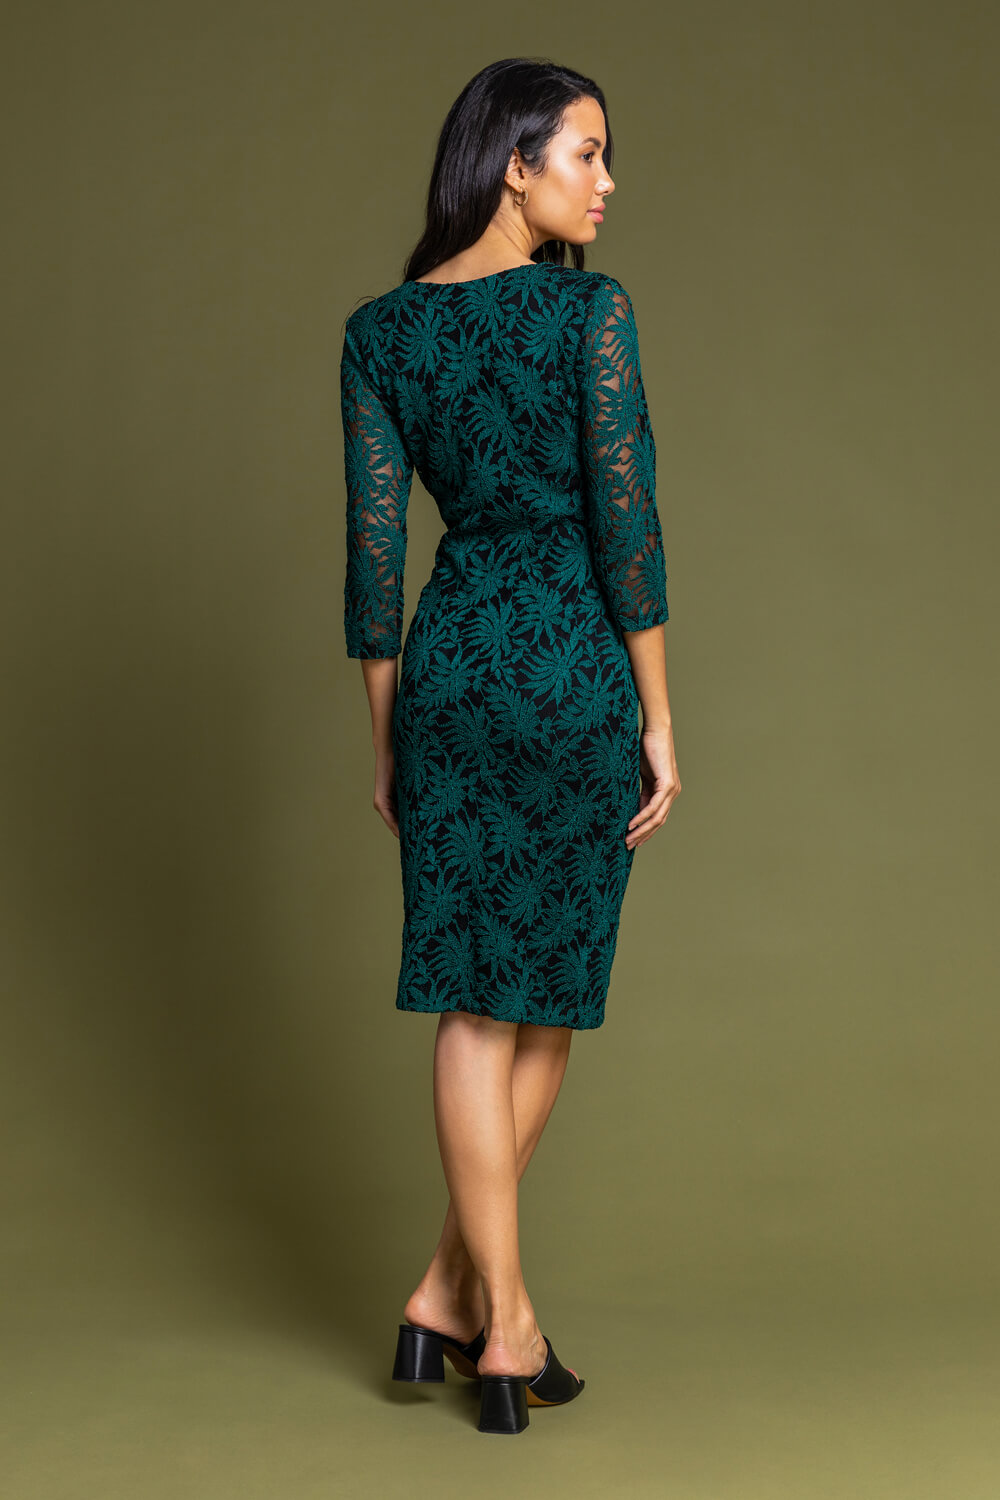 Green Palm Print Lace Ruched Dress, Image 2 of 4